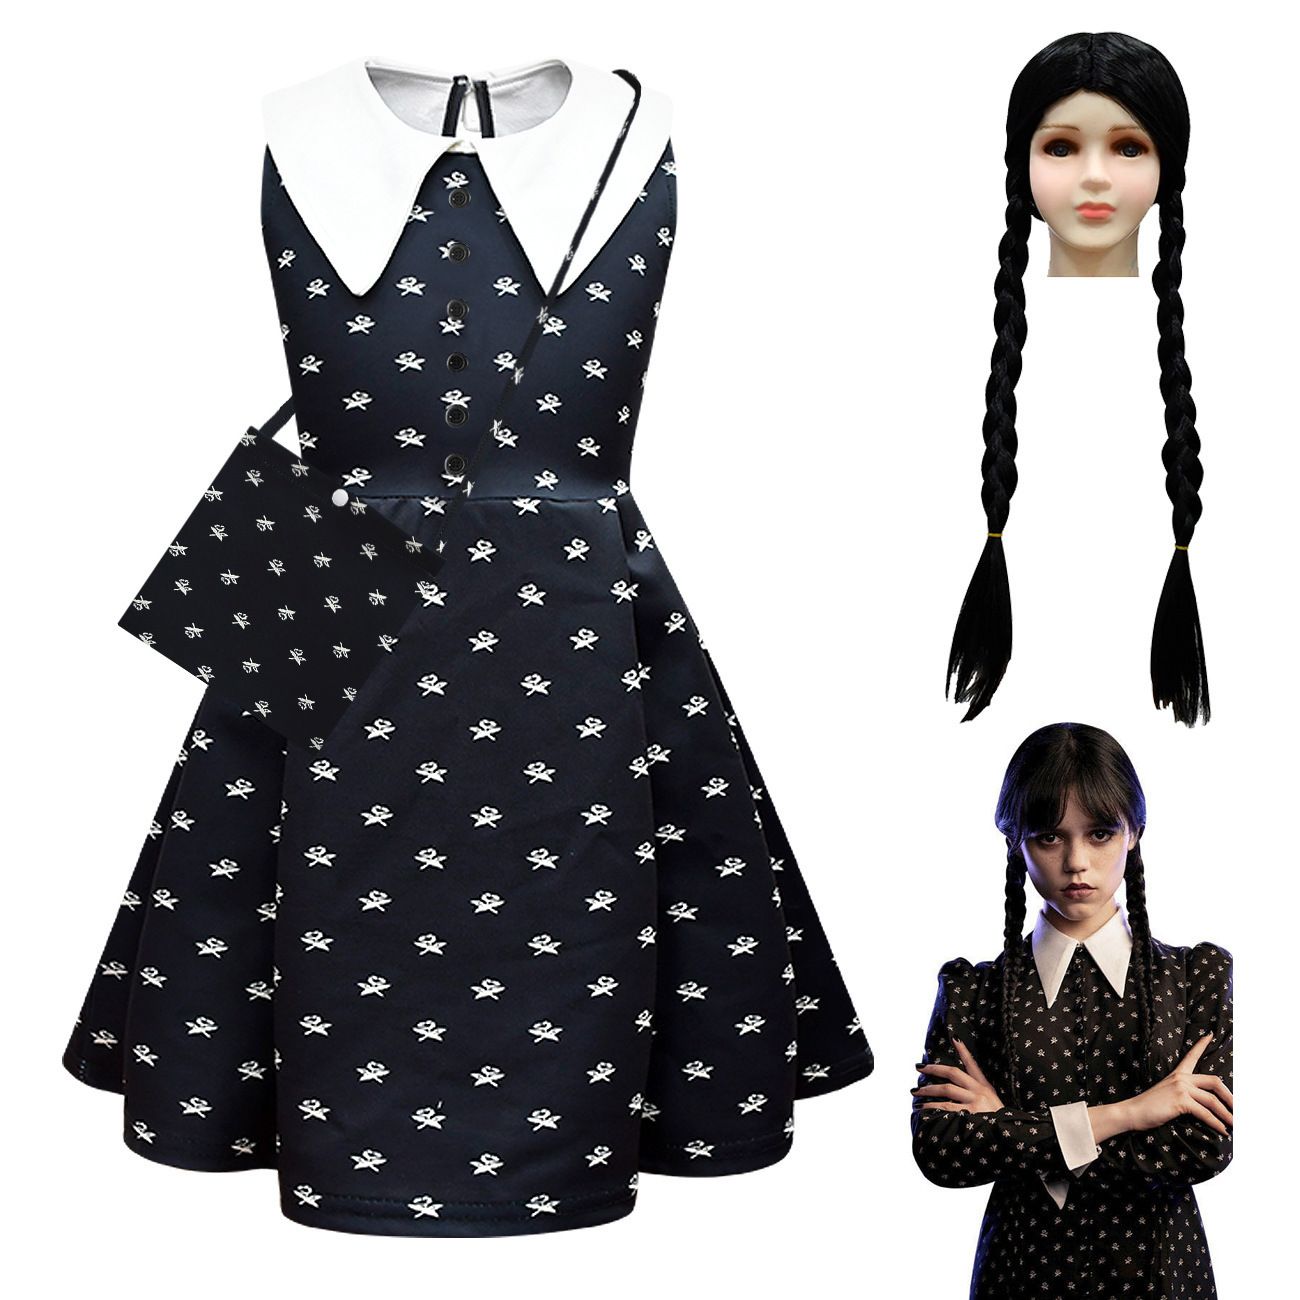 Wednesday Dress for Girls Kids Addams Family Cosplay Costume Outfit